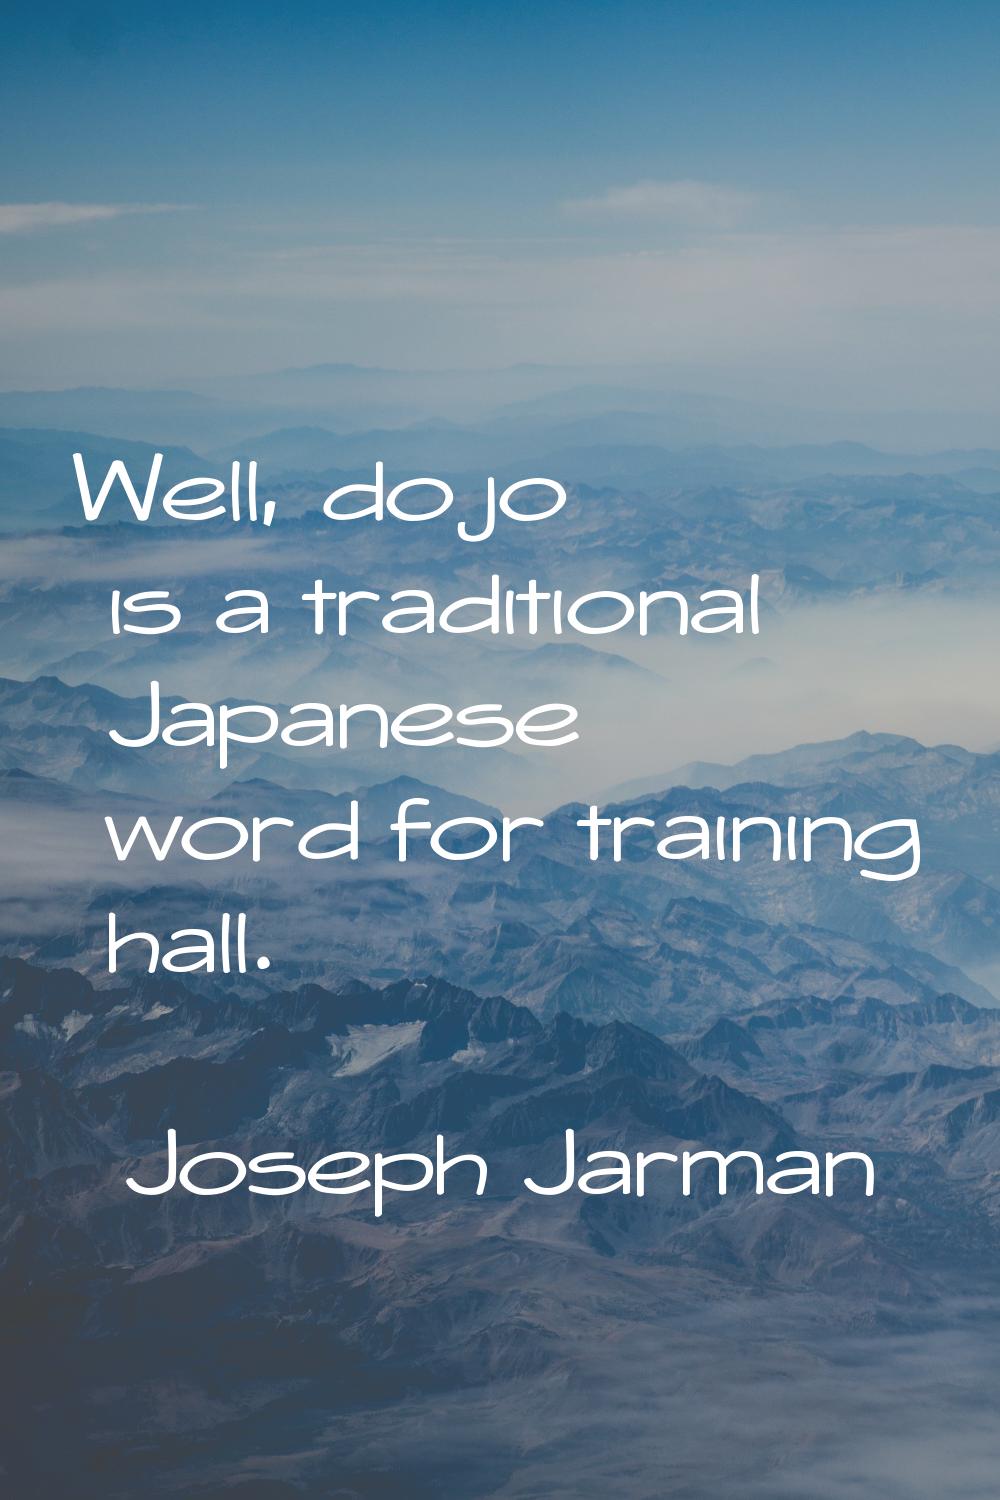 Well, dojo is a traditional Japanese word for training hall.